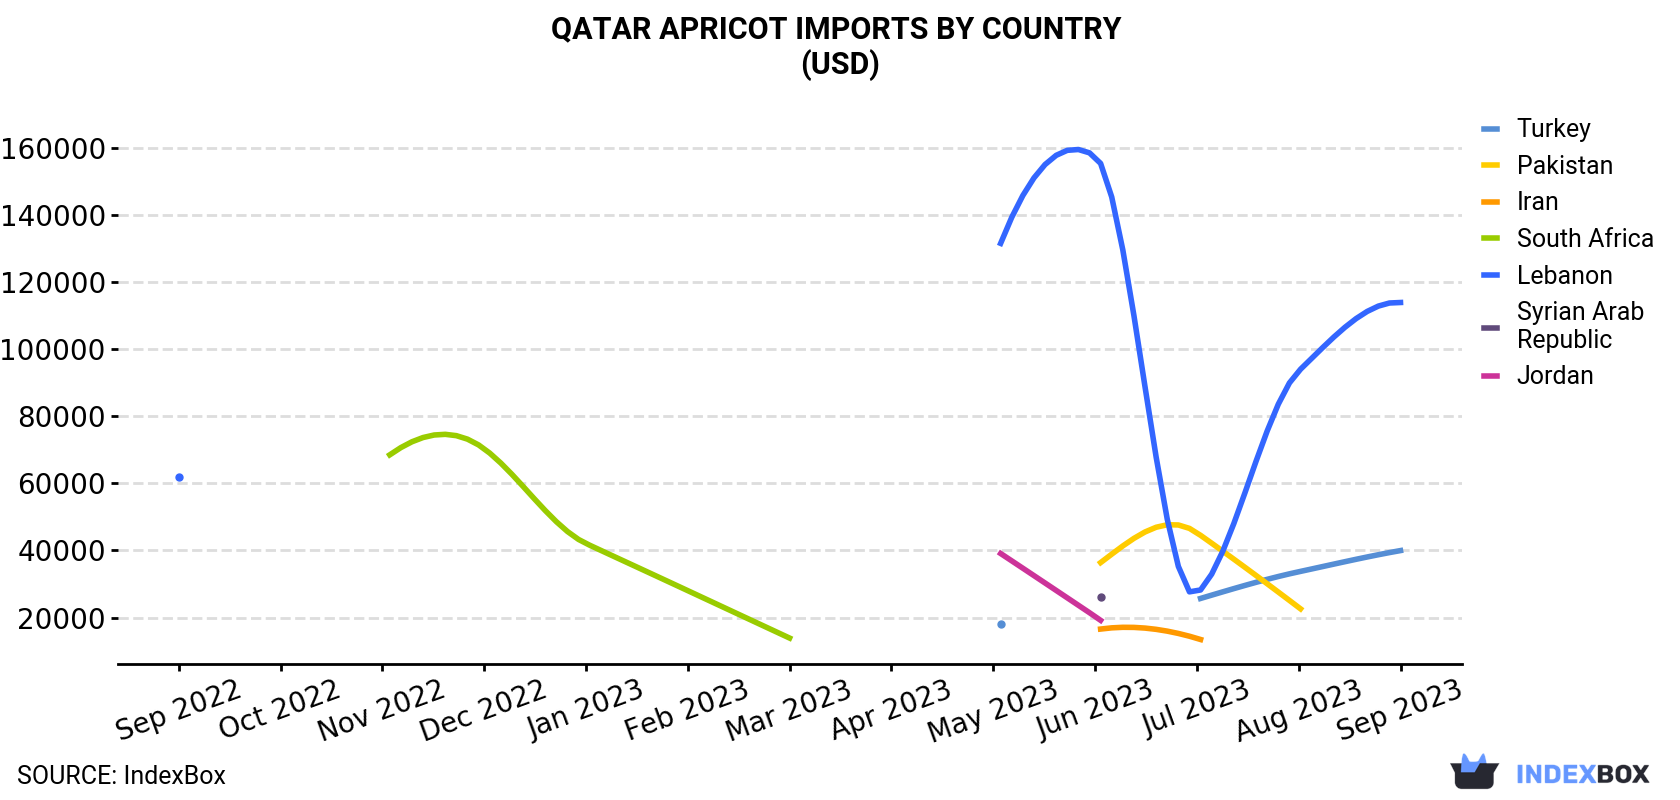 Qatar Apricot Imports By Country (USD)